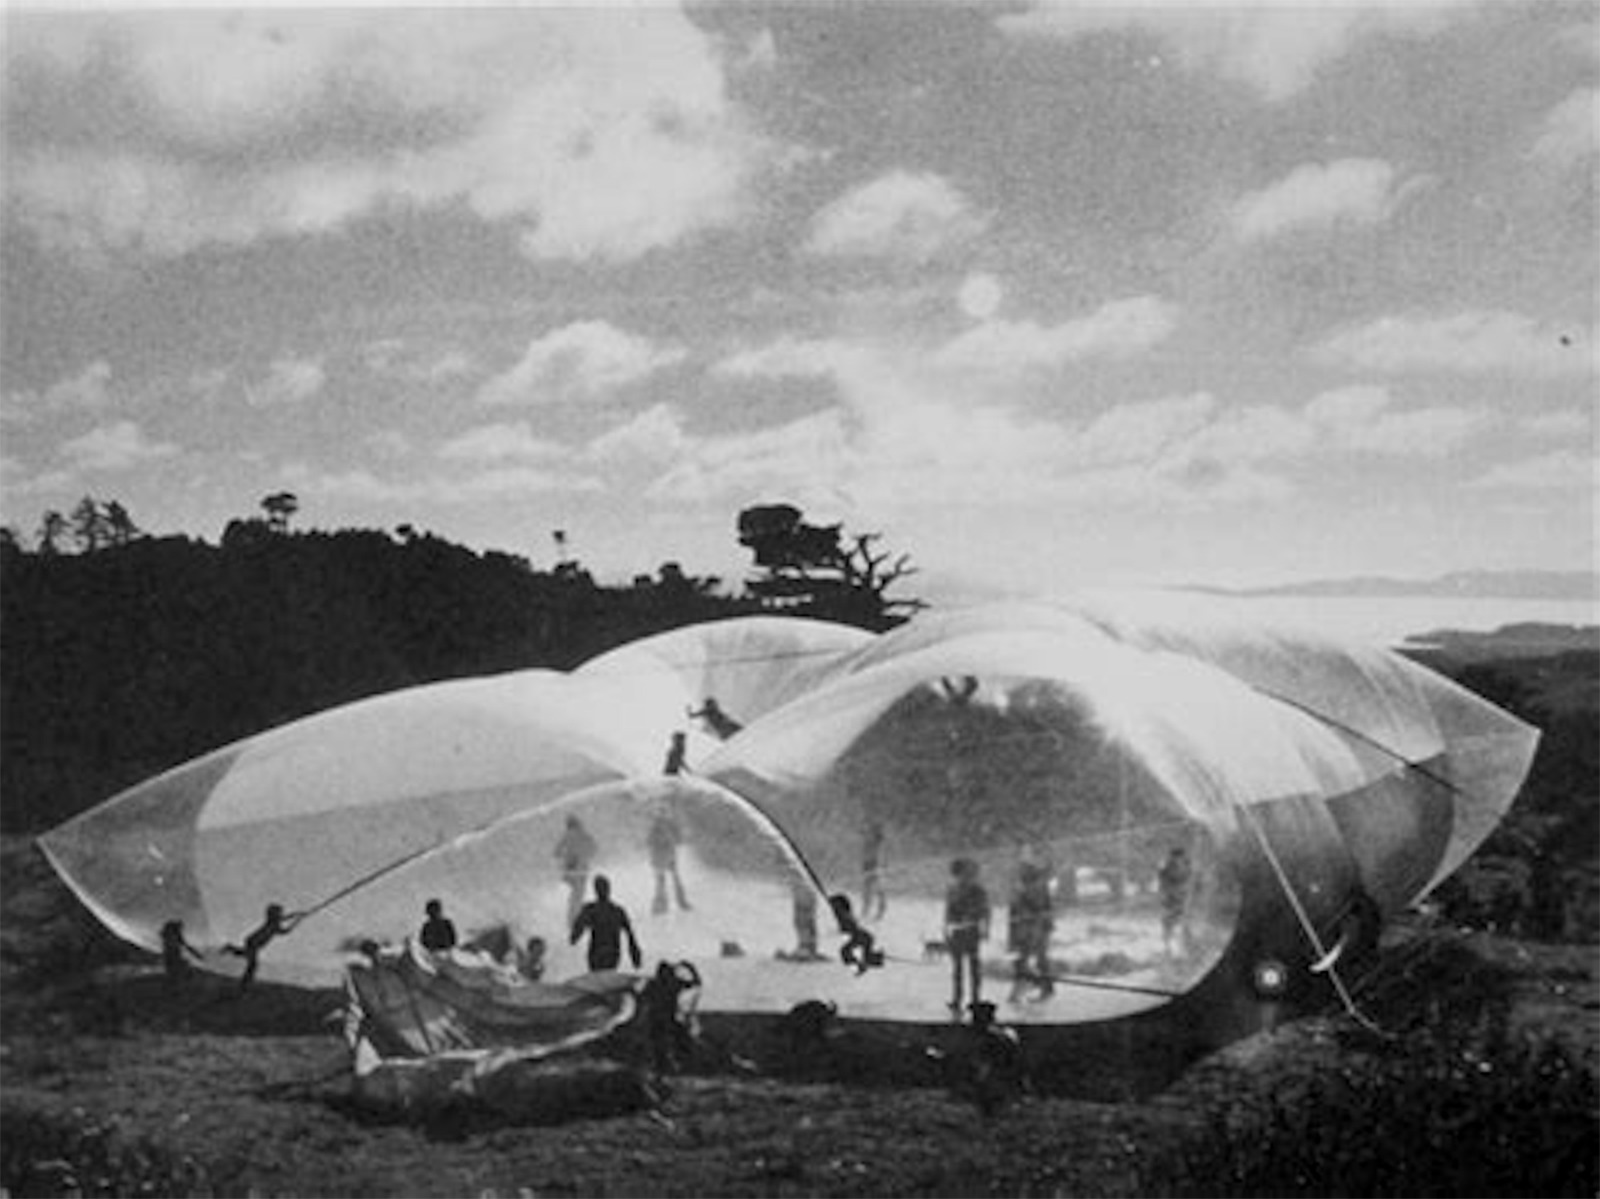 Ant Farm’s 50' x 50' pillow installed at Point Reyes, California, 1970.